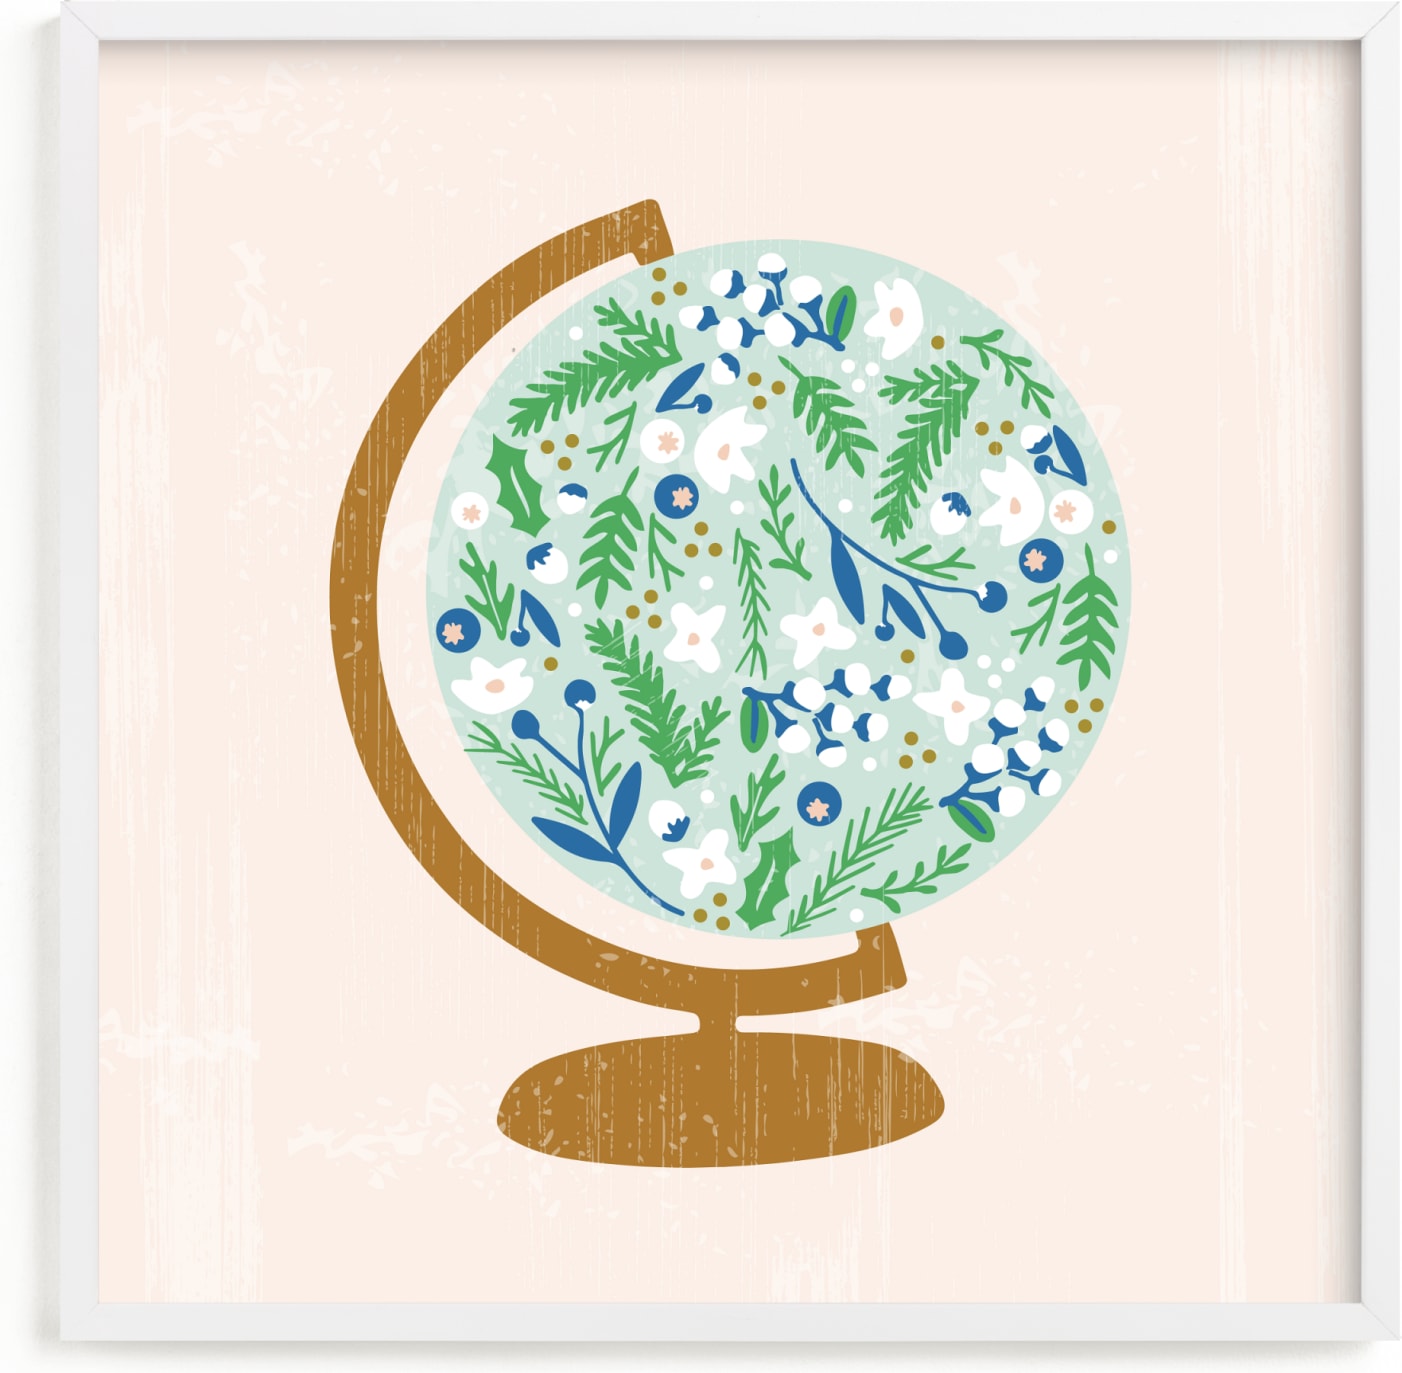 This is a blue kids wall art by Marabou Design called Global Flor.